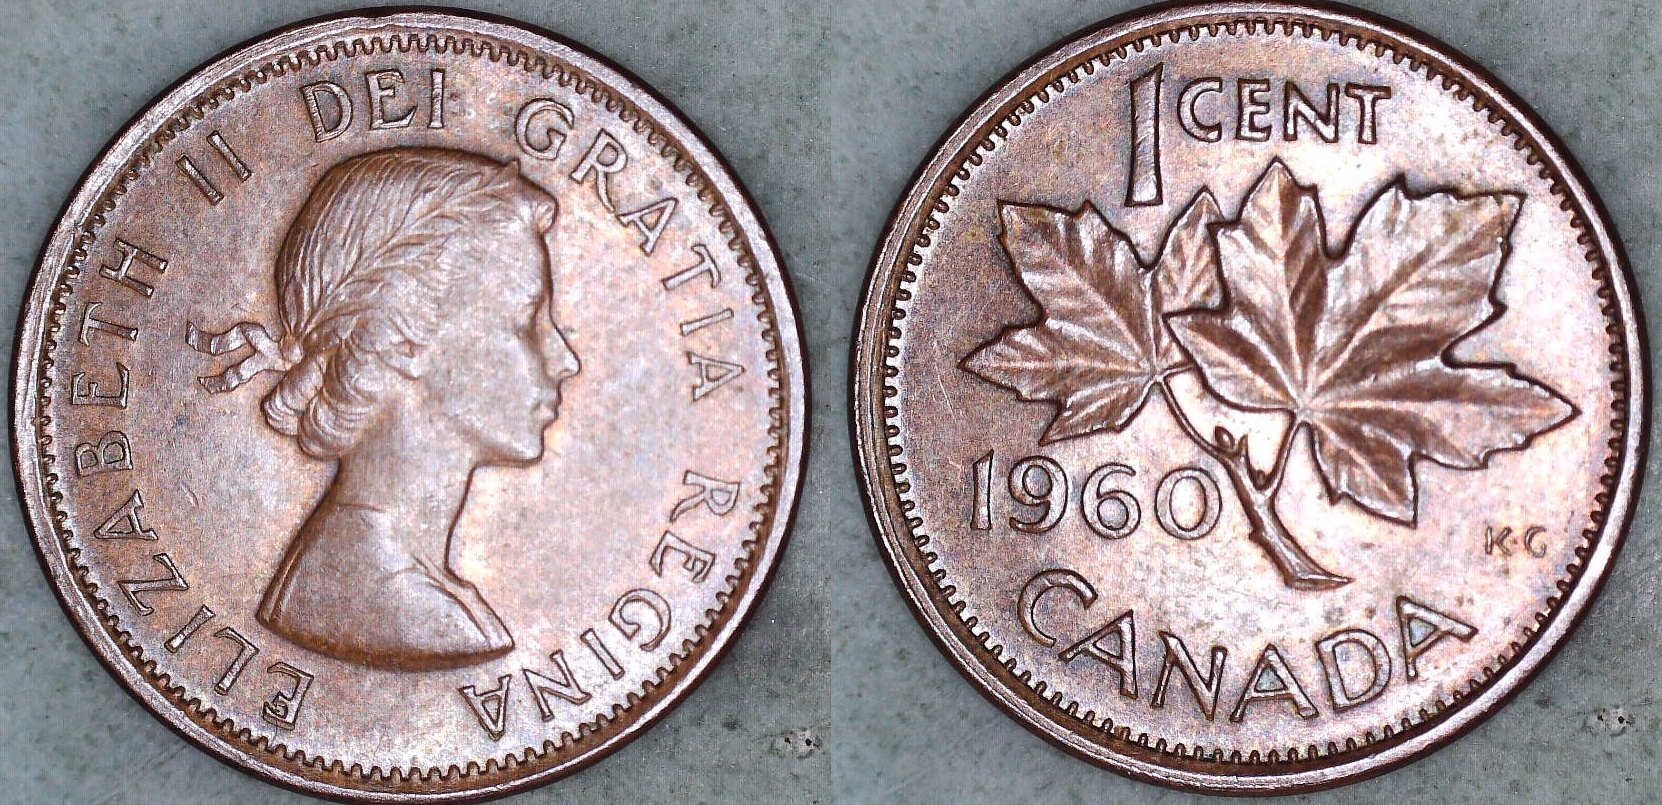 1960 Can Toned.jpg